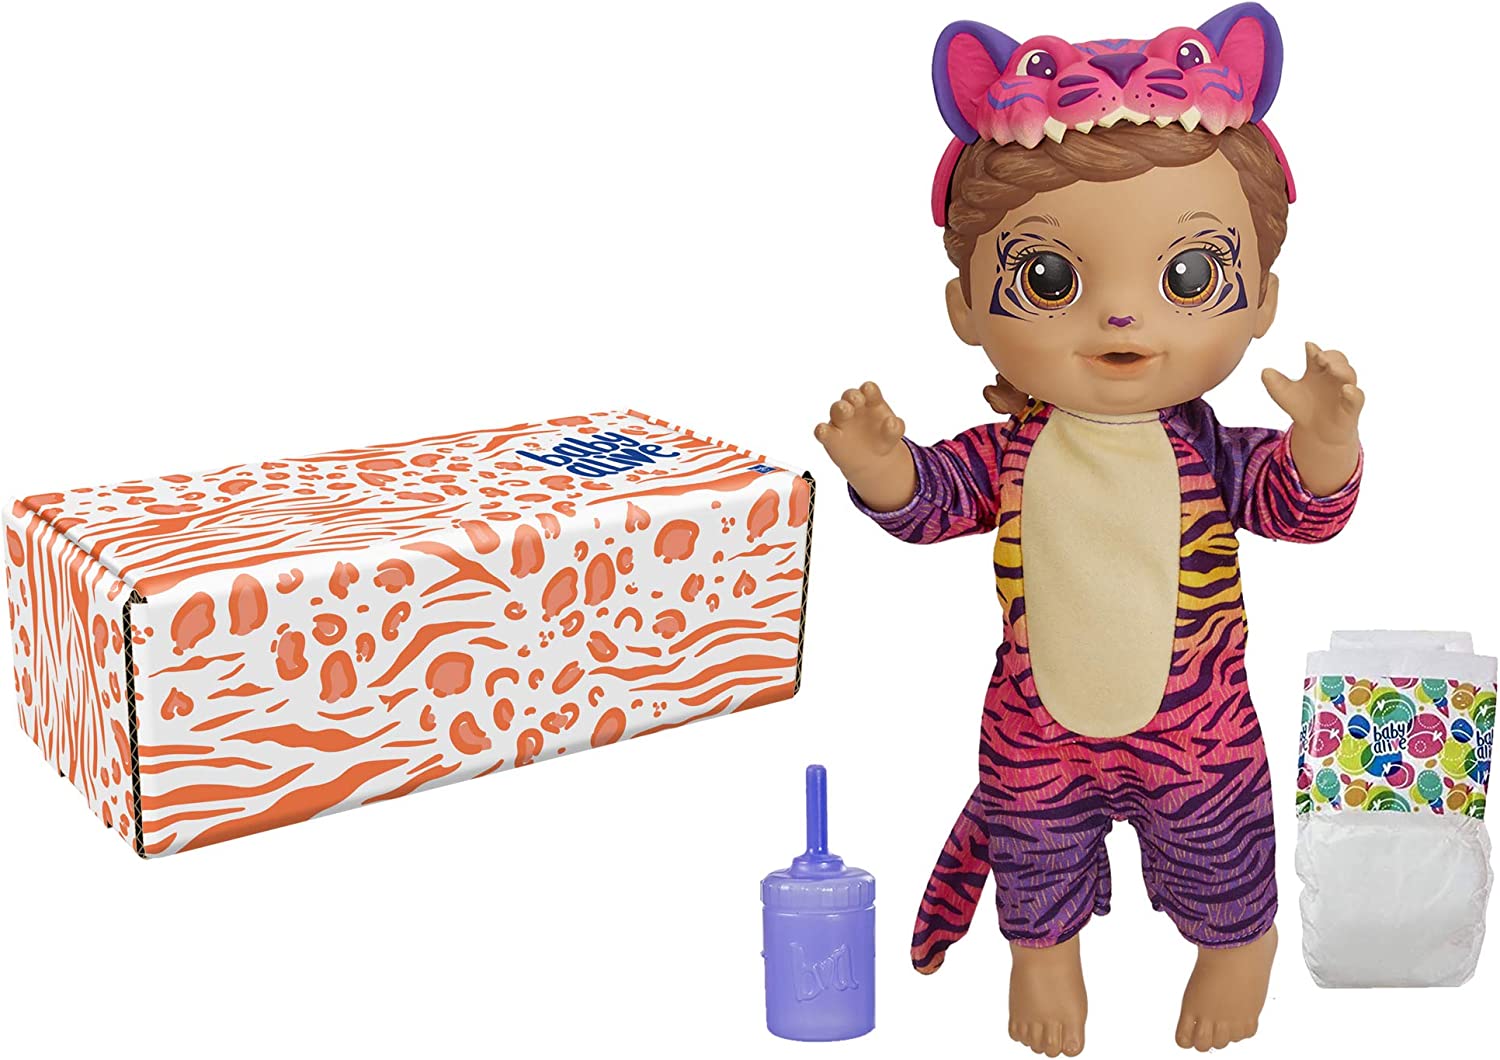 Baby Alive Rainbow Wildcats Doll w/ Accessories $10.35 + Free Shipping w/ Prime or $25+